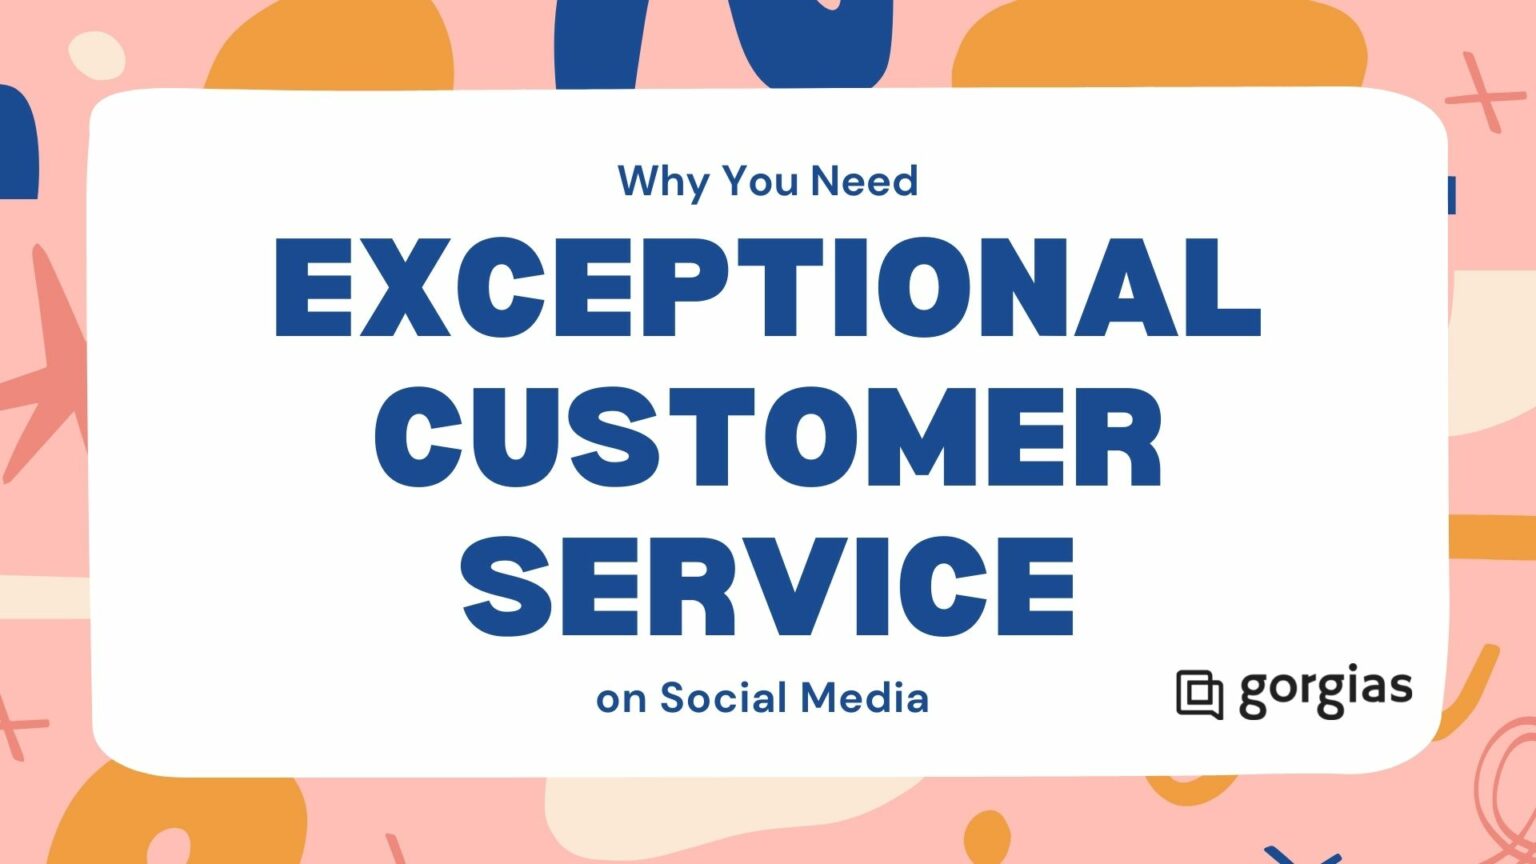 Why You Need Exceptional Customer Service on Social Media